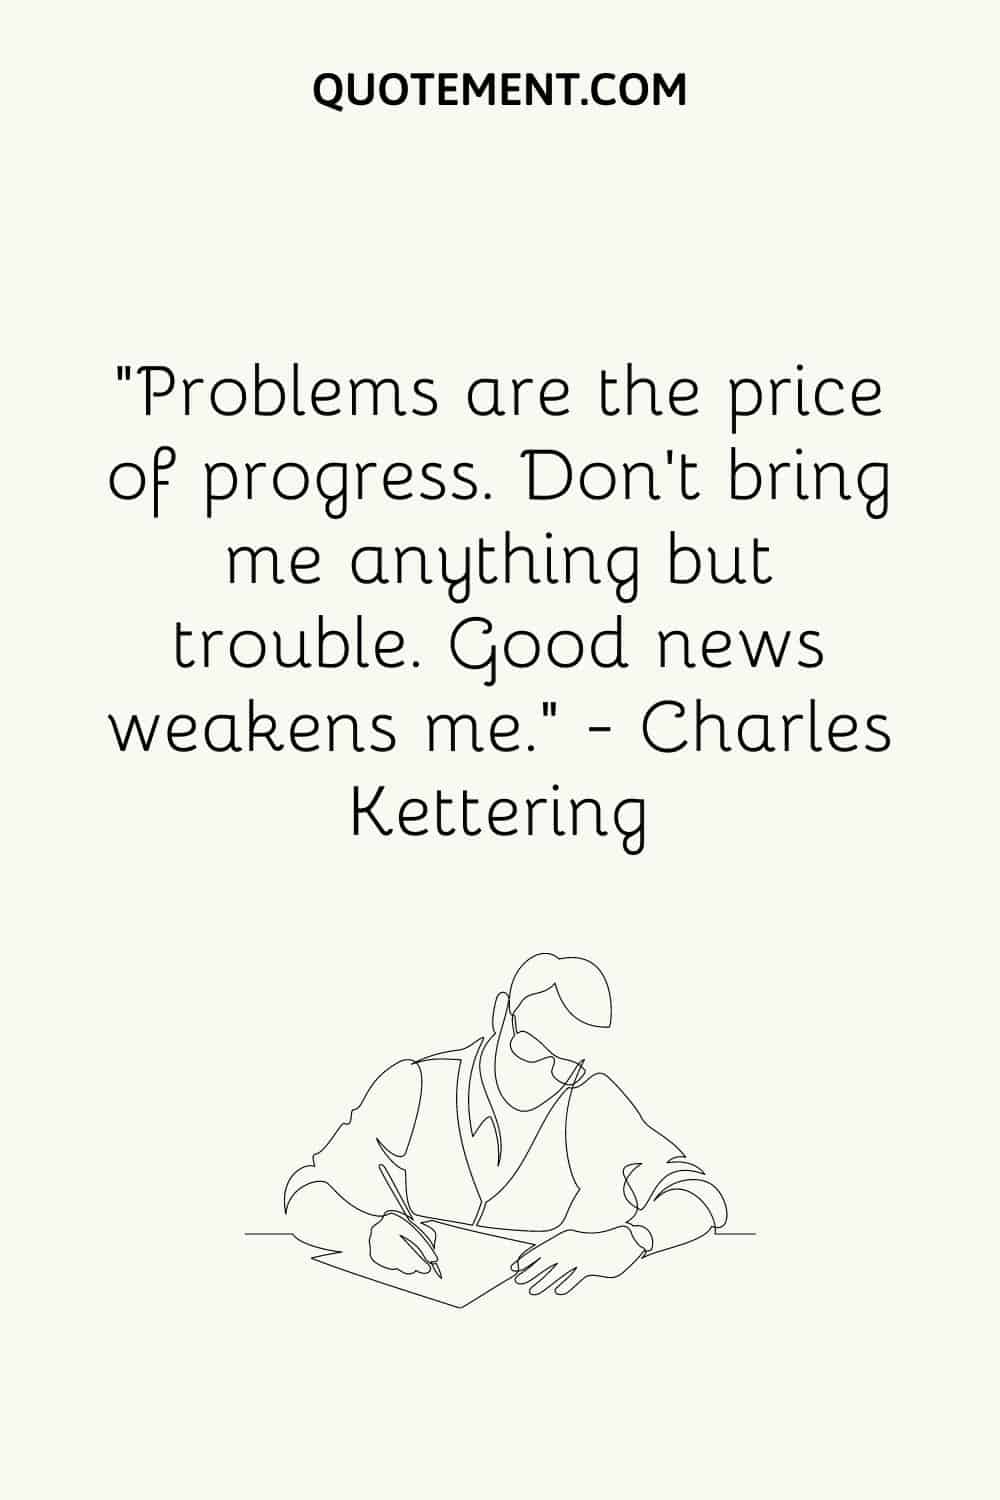 Problems are the price of progress